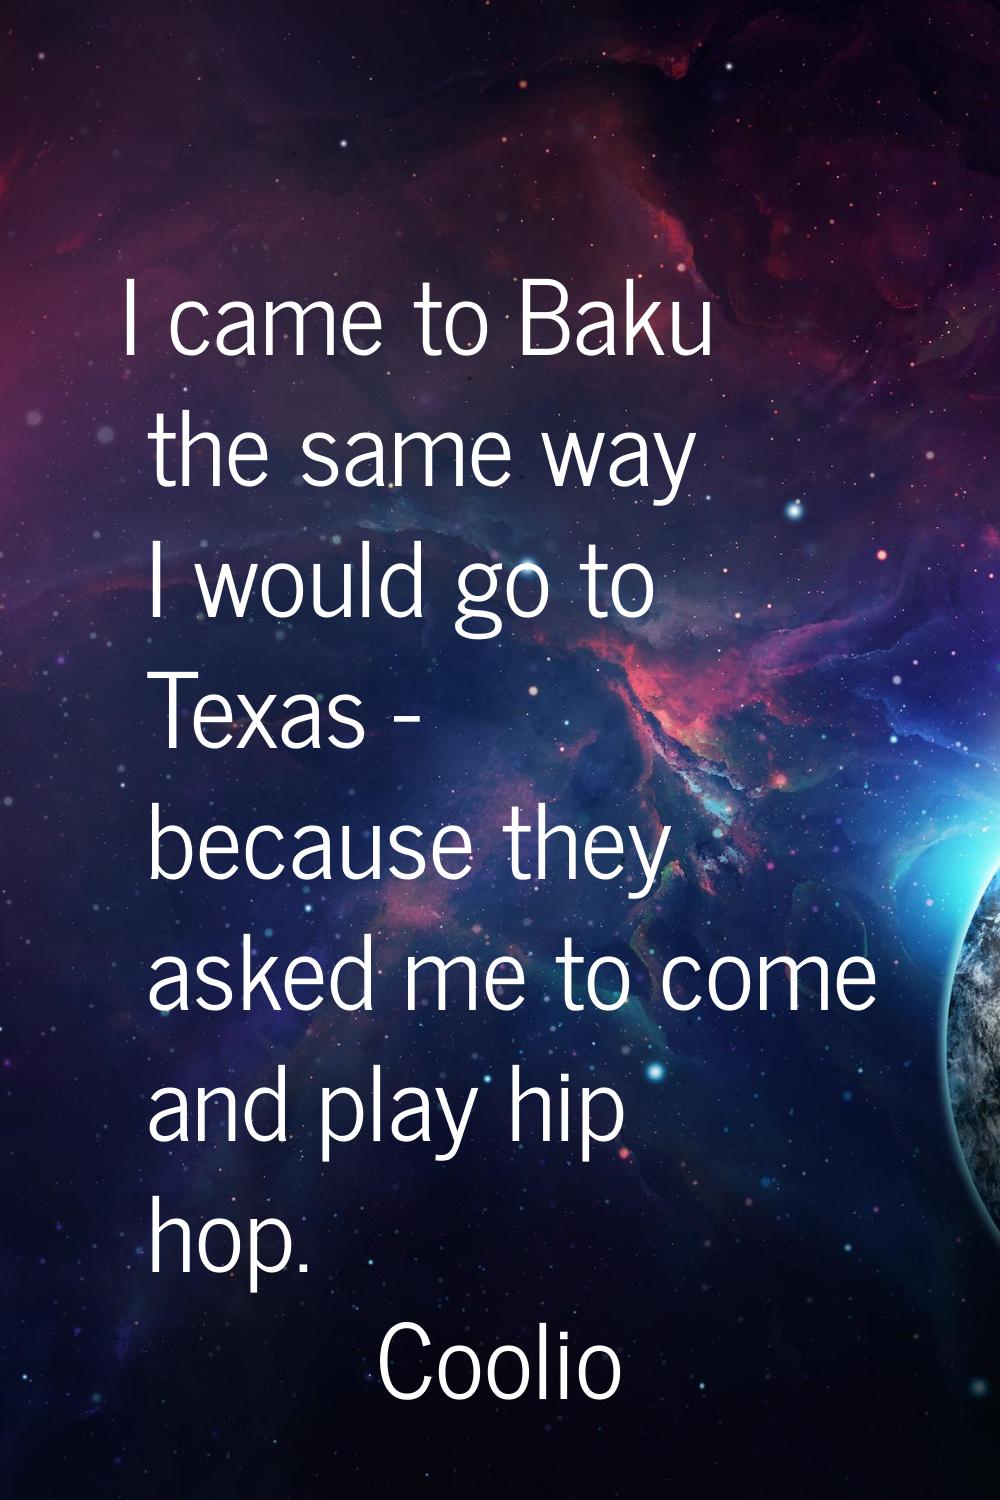 I came to Baku the same way I would go to Texas - because they asked me to come and play hip hop.